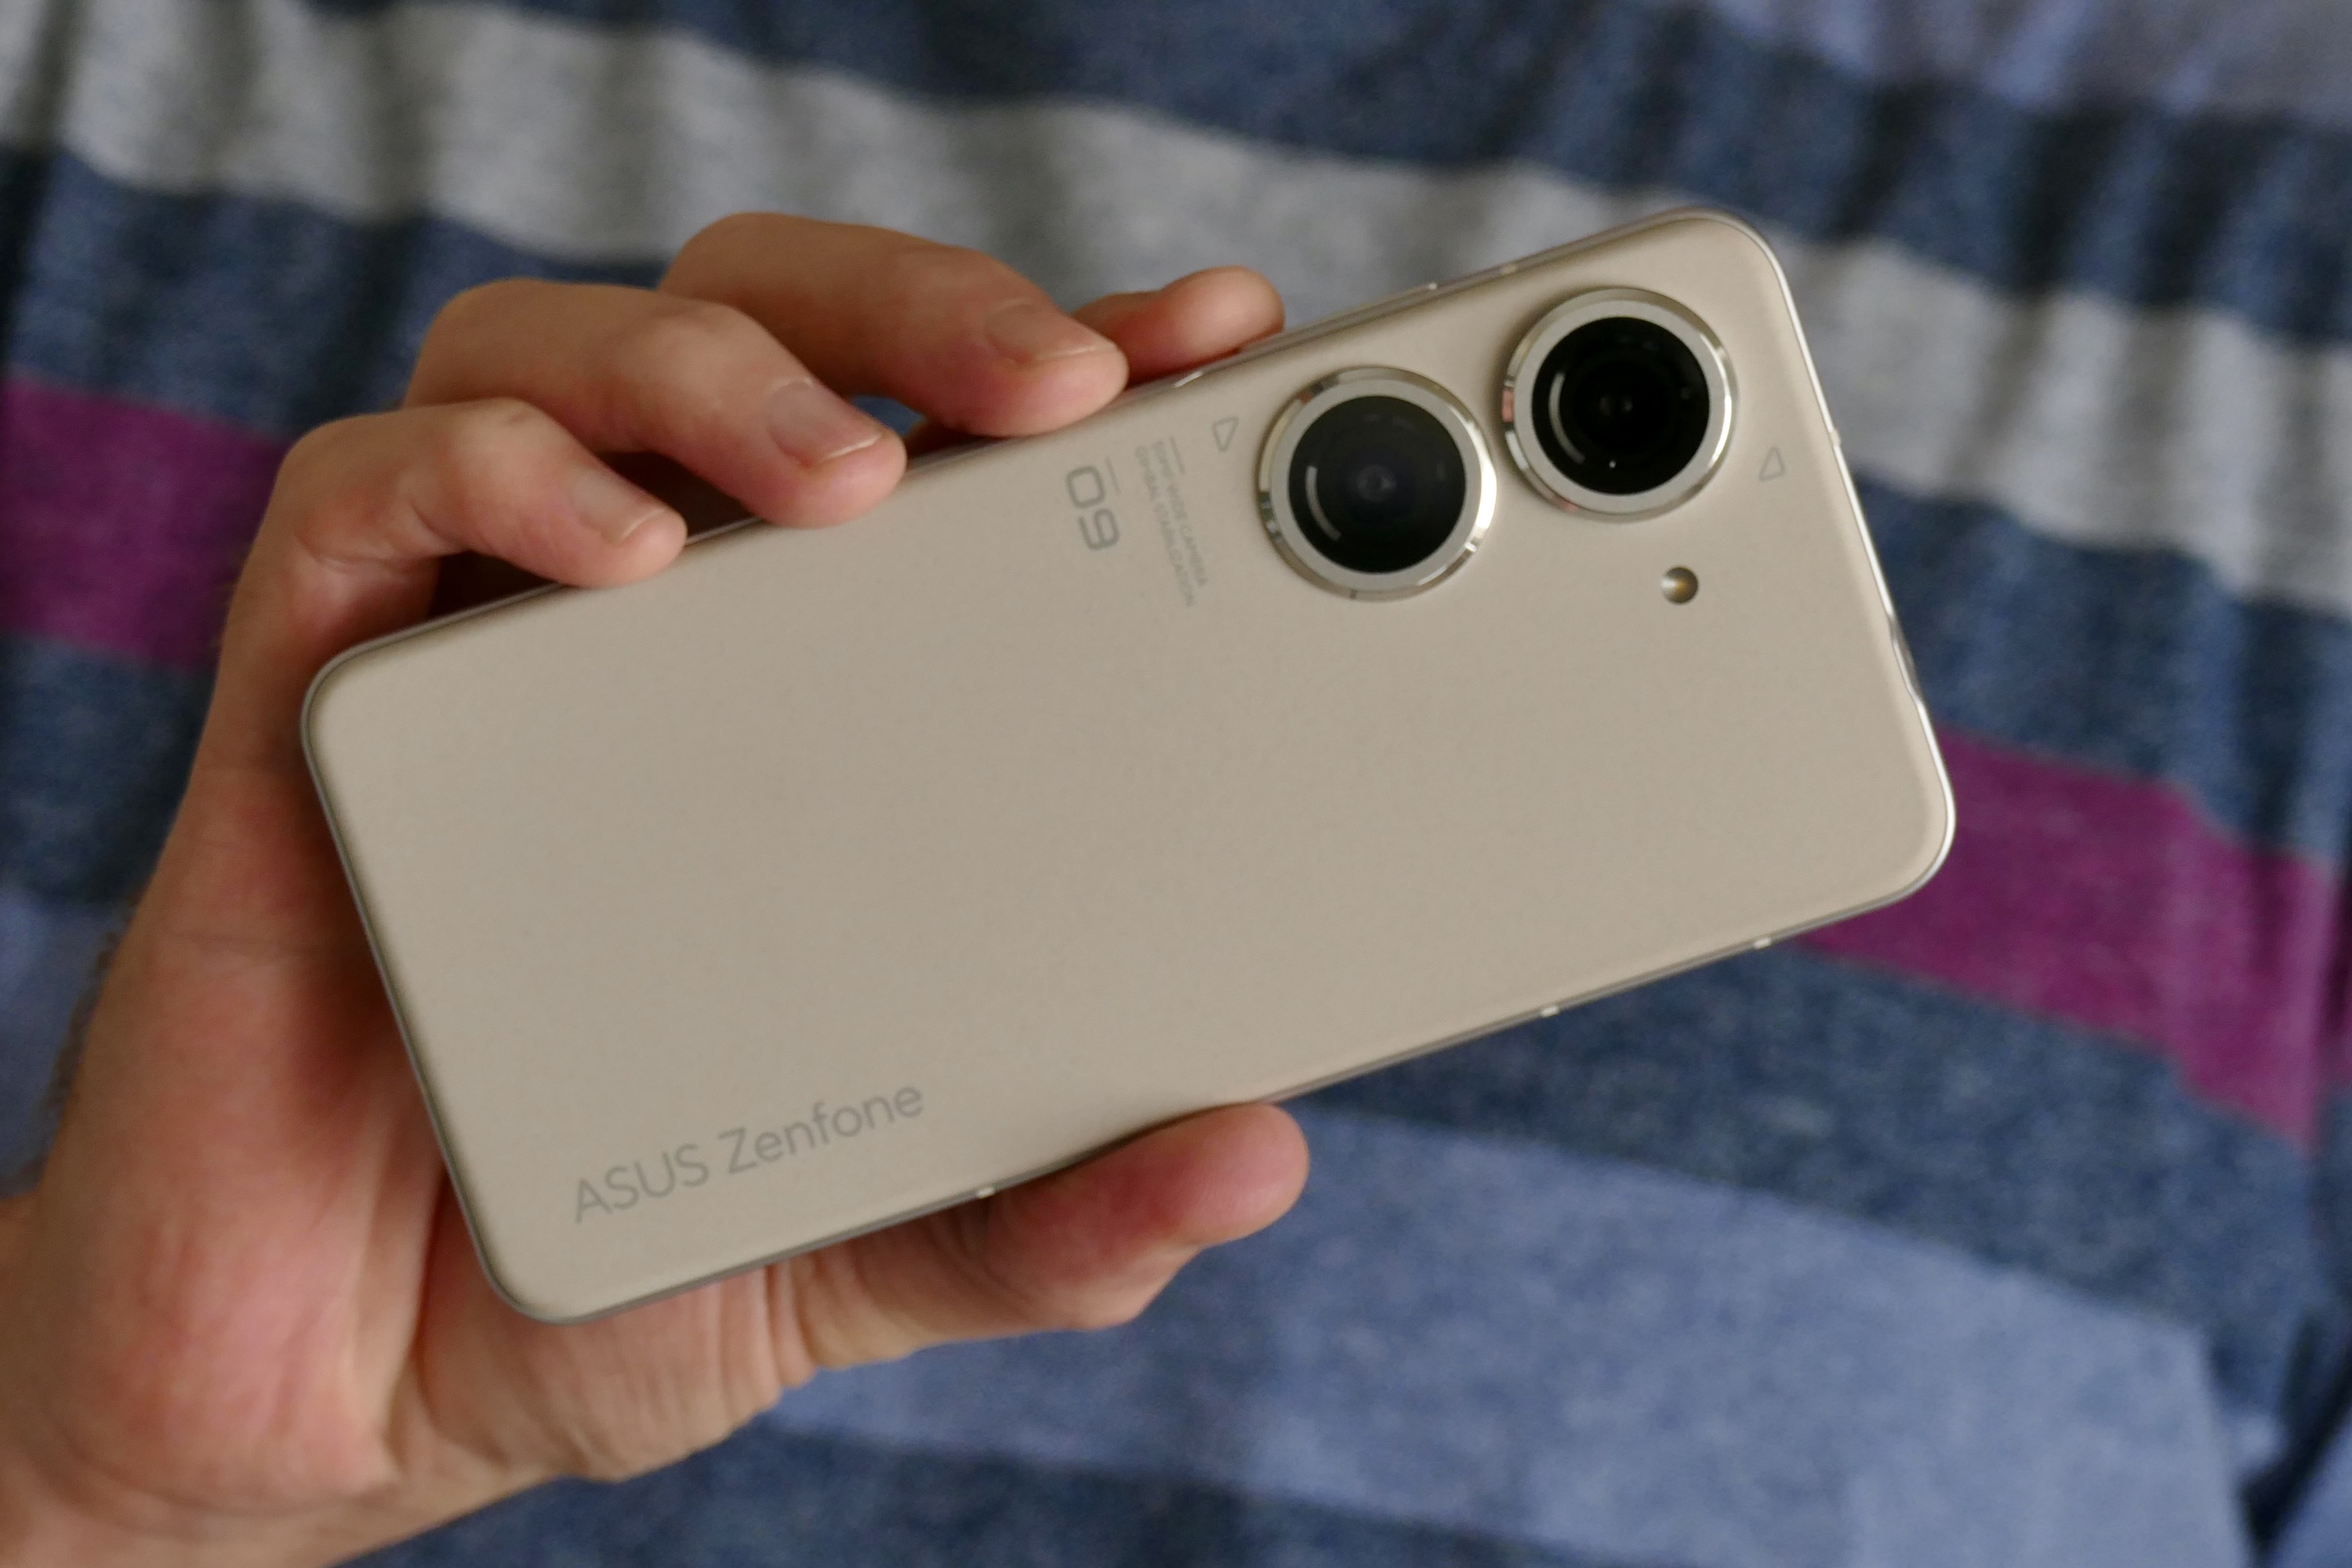 Stadion satire Schaken Asus Zenfone 9 review: the flagship you can use with 1 hand | Digital Trends